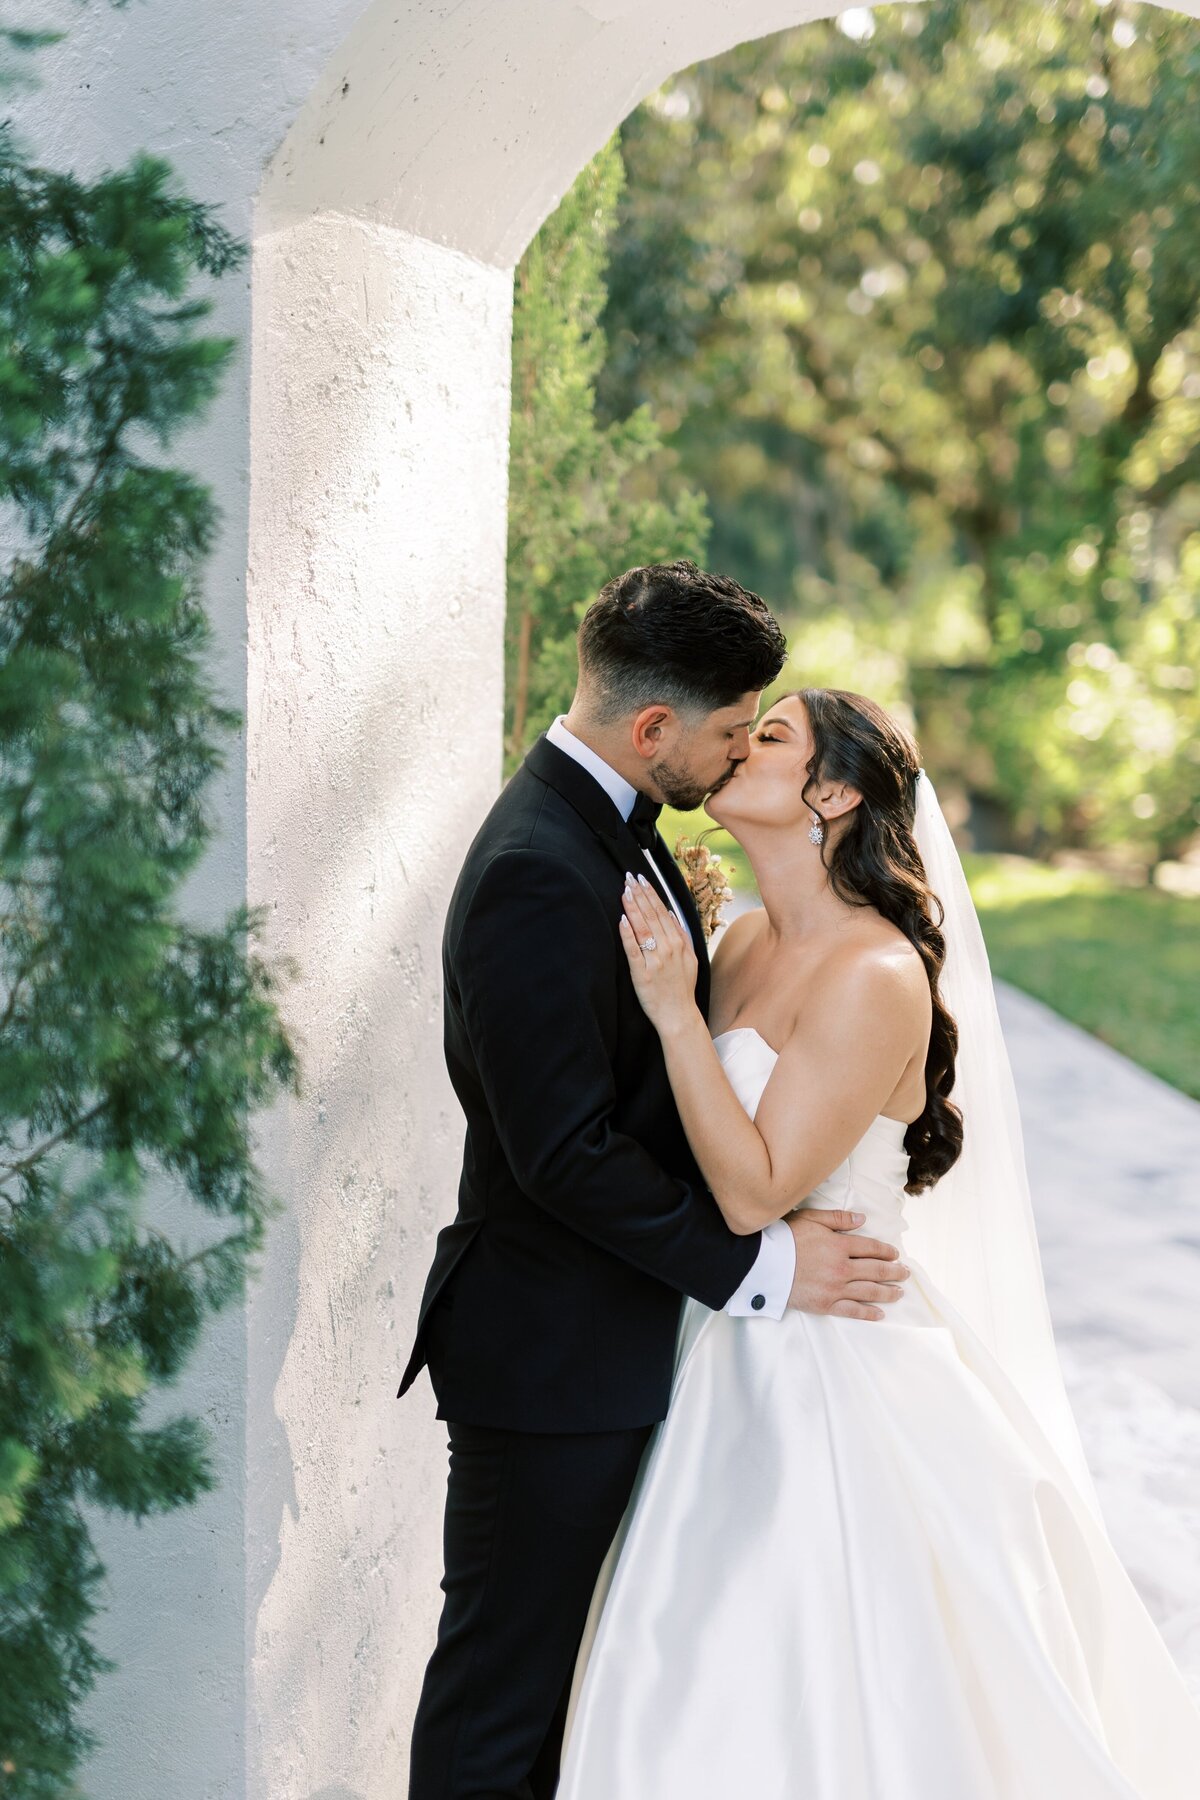 Alexiss and Gabriel - Matlock and Kelly Photography-24-min